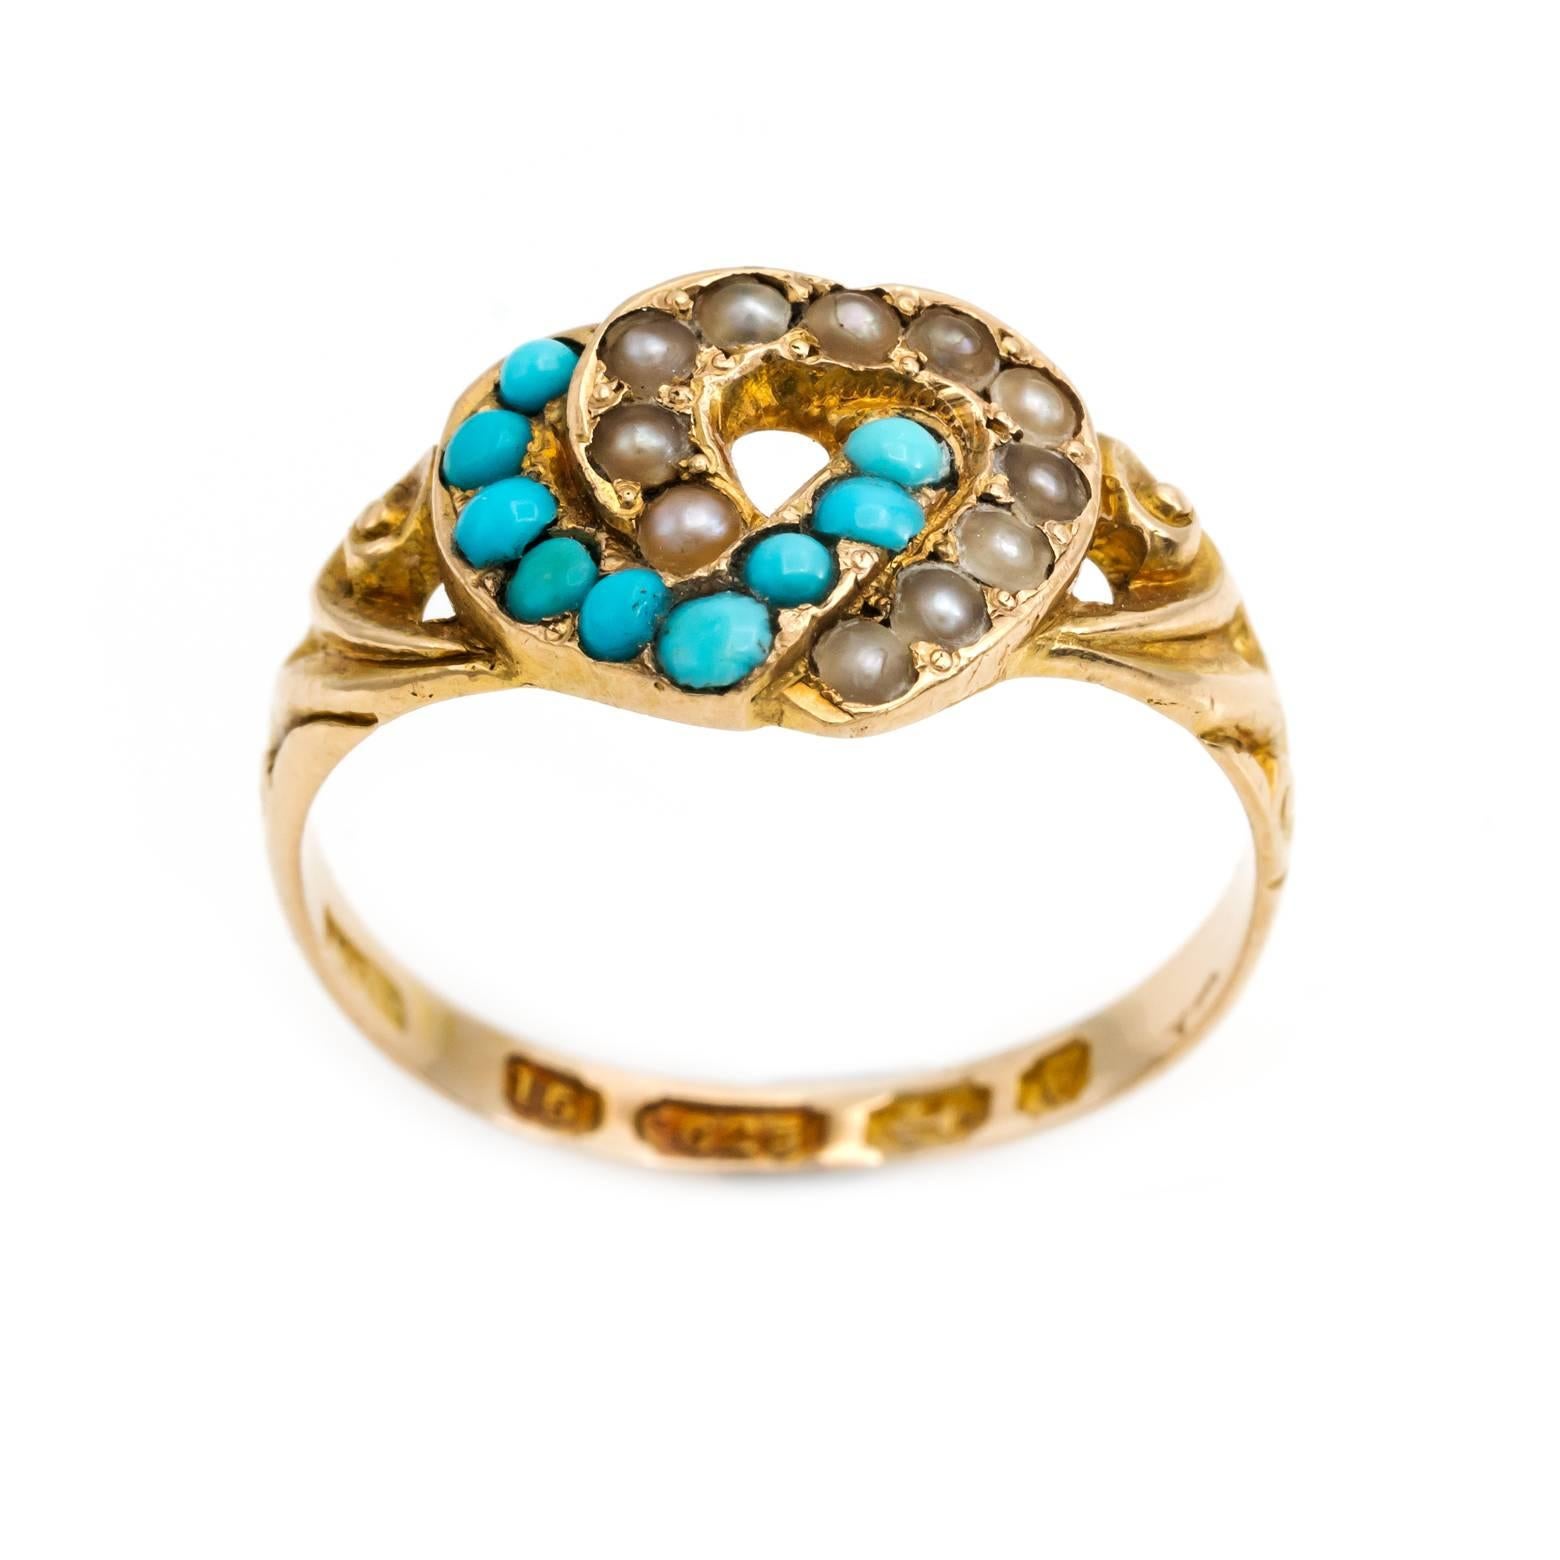 This sweet ring is two interlocking hearts of 15k gold. One of turquoise and one of pearls. The ring is a hallmarked Birmingham United Kingdom piece from 1871. A very special ring for that special someone. It is a size 5.